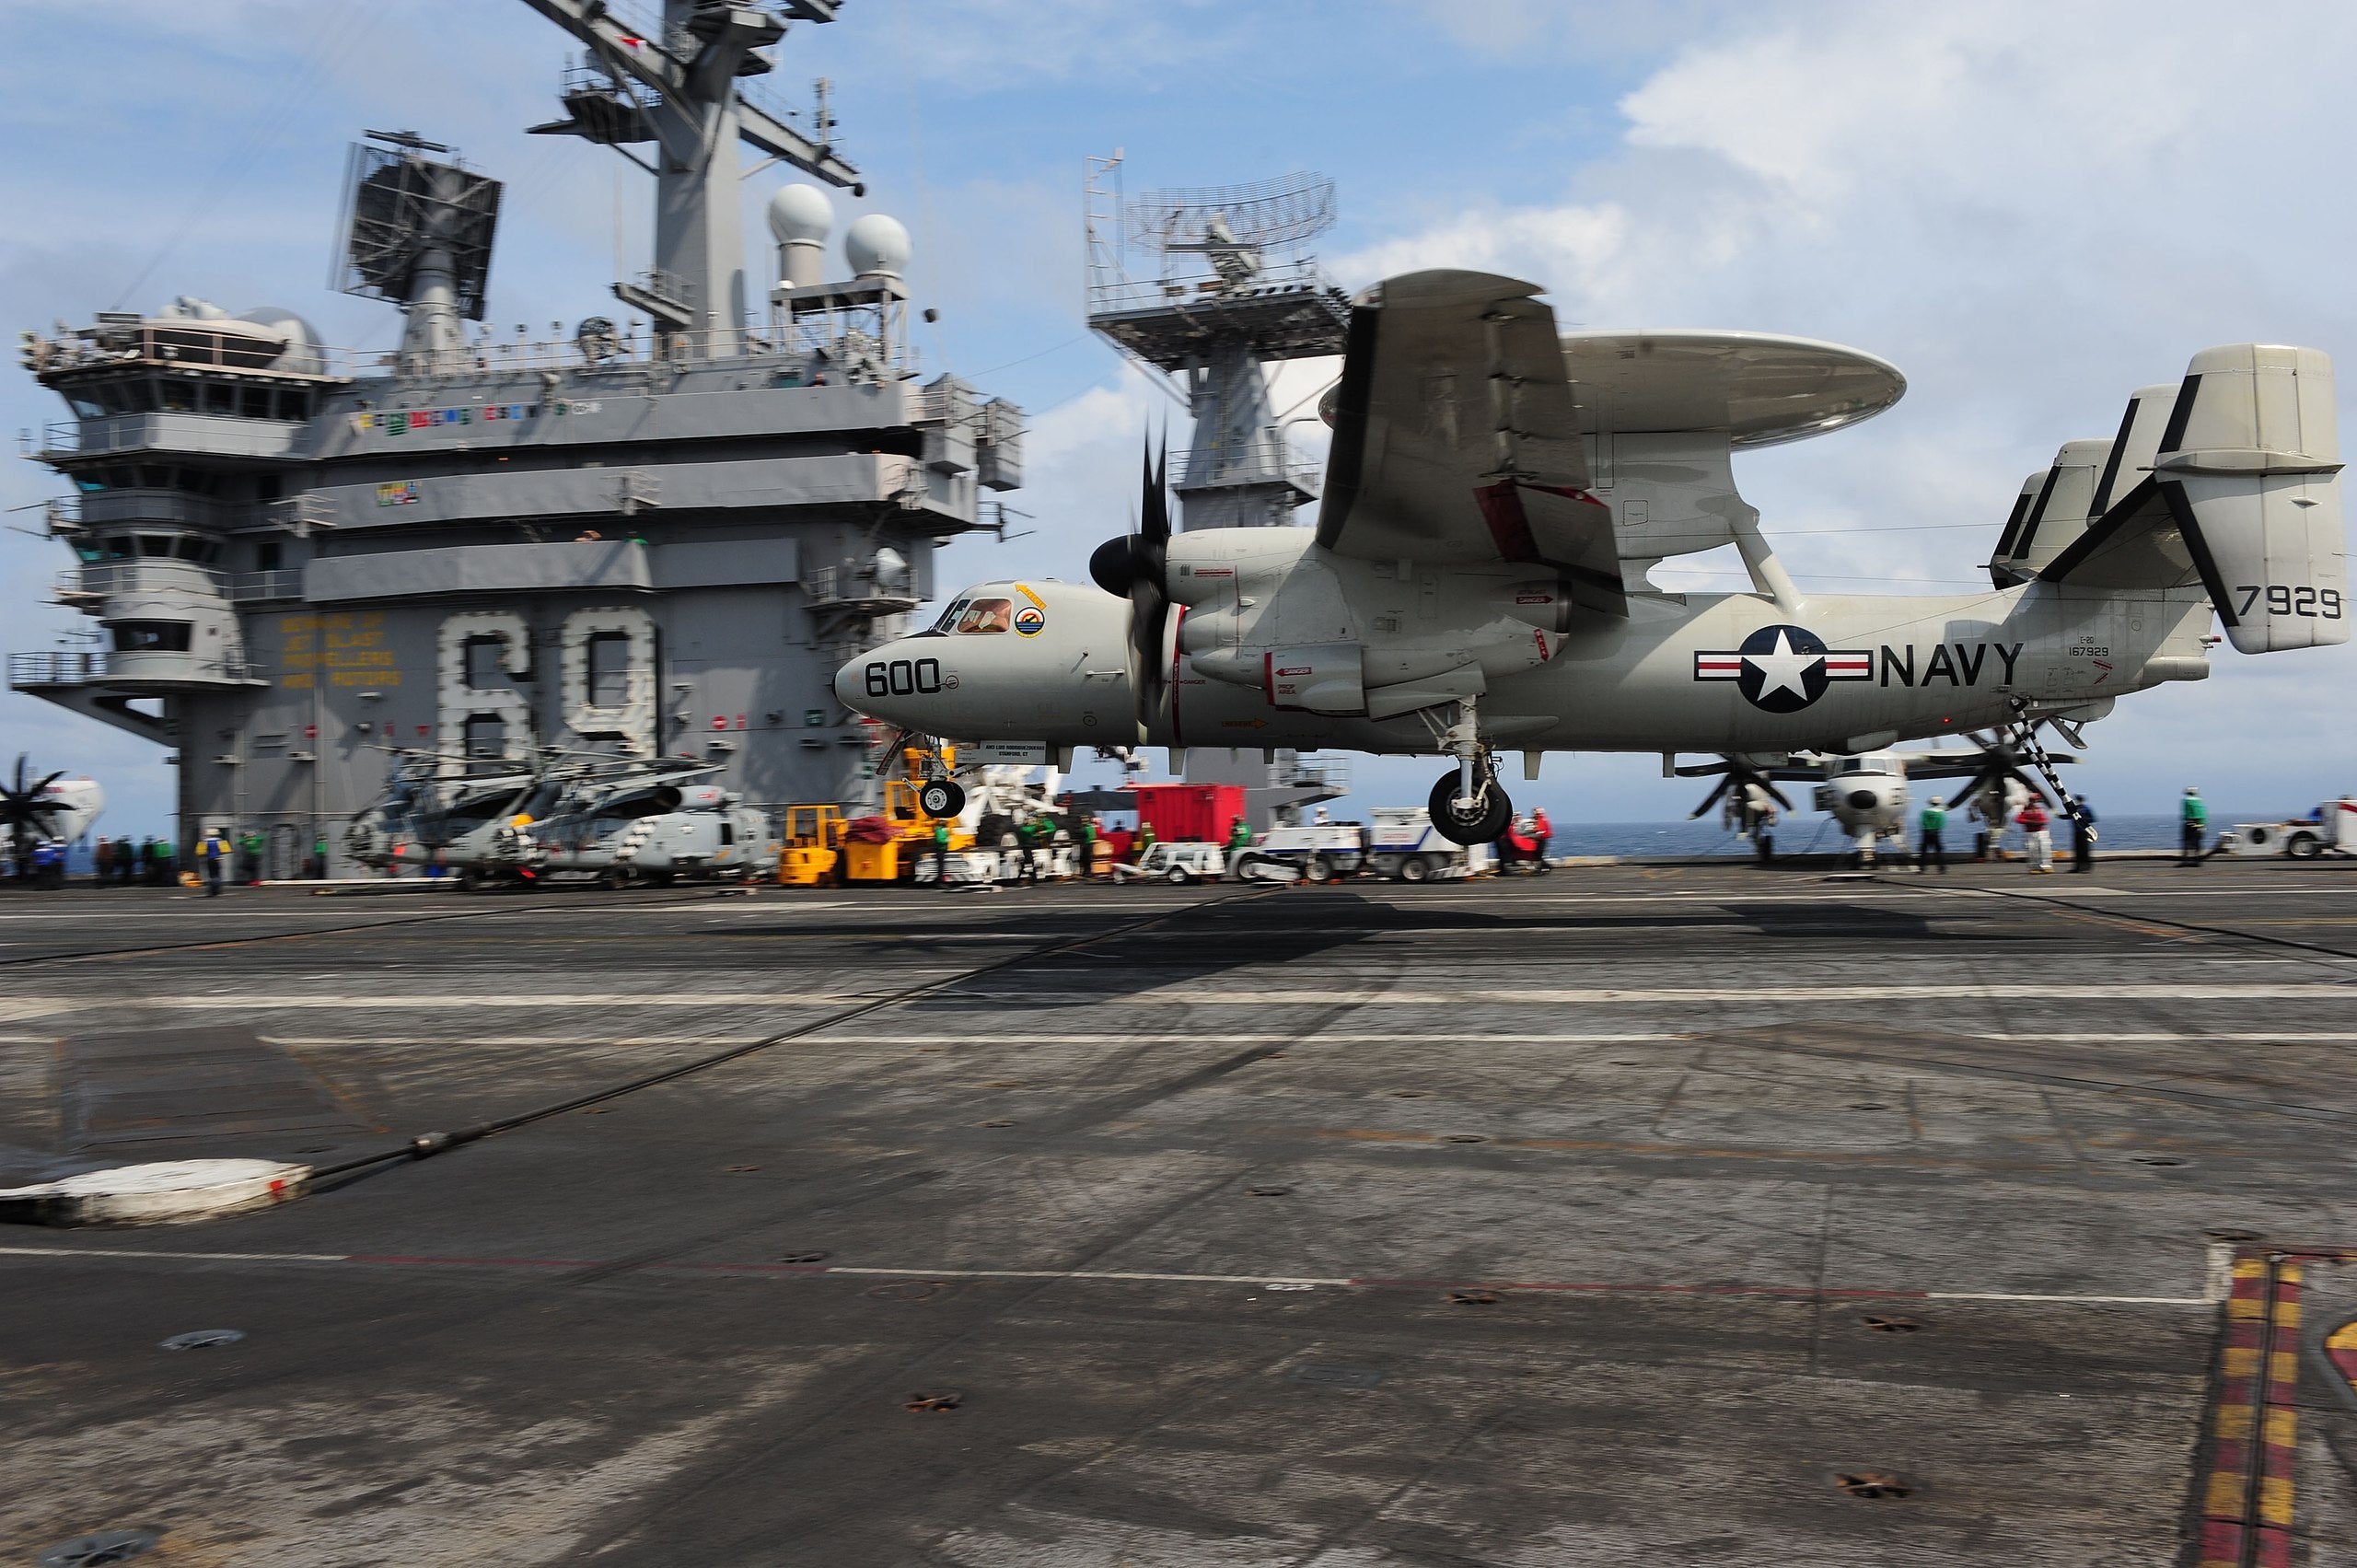 110917-N-BQ817-168 ATLANTIC OCEAN (Sept. 17, 2011) – An E-2D Hawkeye assigned to Test and Evaluation Squadron (VX) 1 makes an arrested landing aboard USS Dwight D. Eisenhower(CVN 69). USS Dwight D. Eisenhower is currently underway conducting carrier qualifications. (U.S. Navy photo by Mass Communication Specialist Seaman Albert Jones/Released)